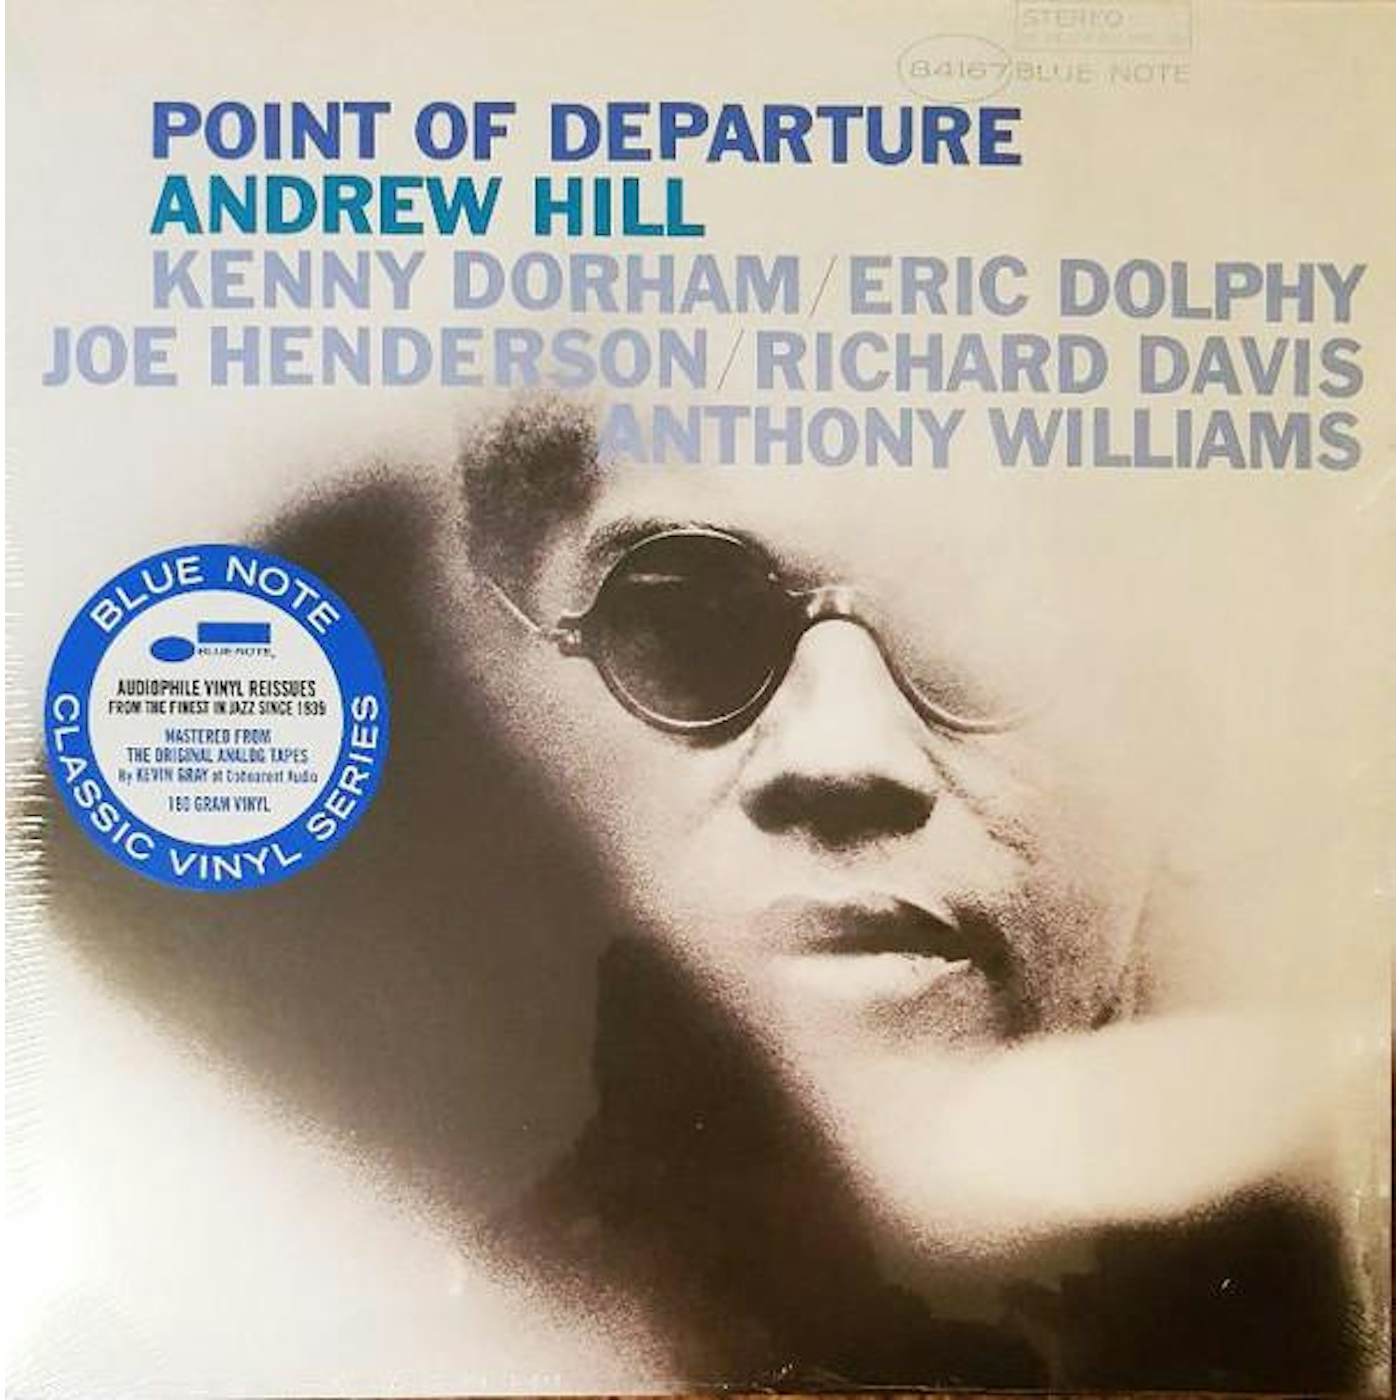 Andrew Hill POINT OF DEPARTURE (BLUE NOTE CLASSIC VINYL SERIES) Vinyl Record